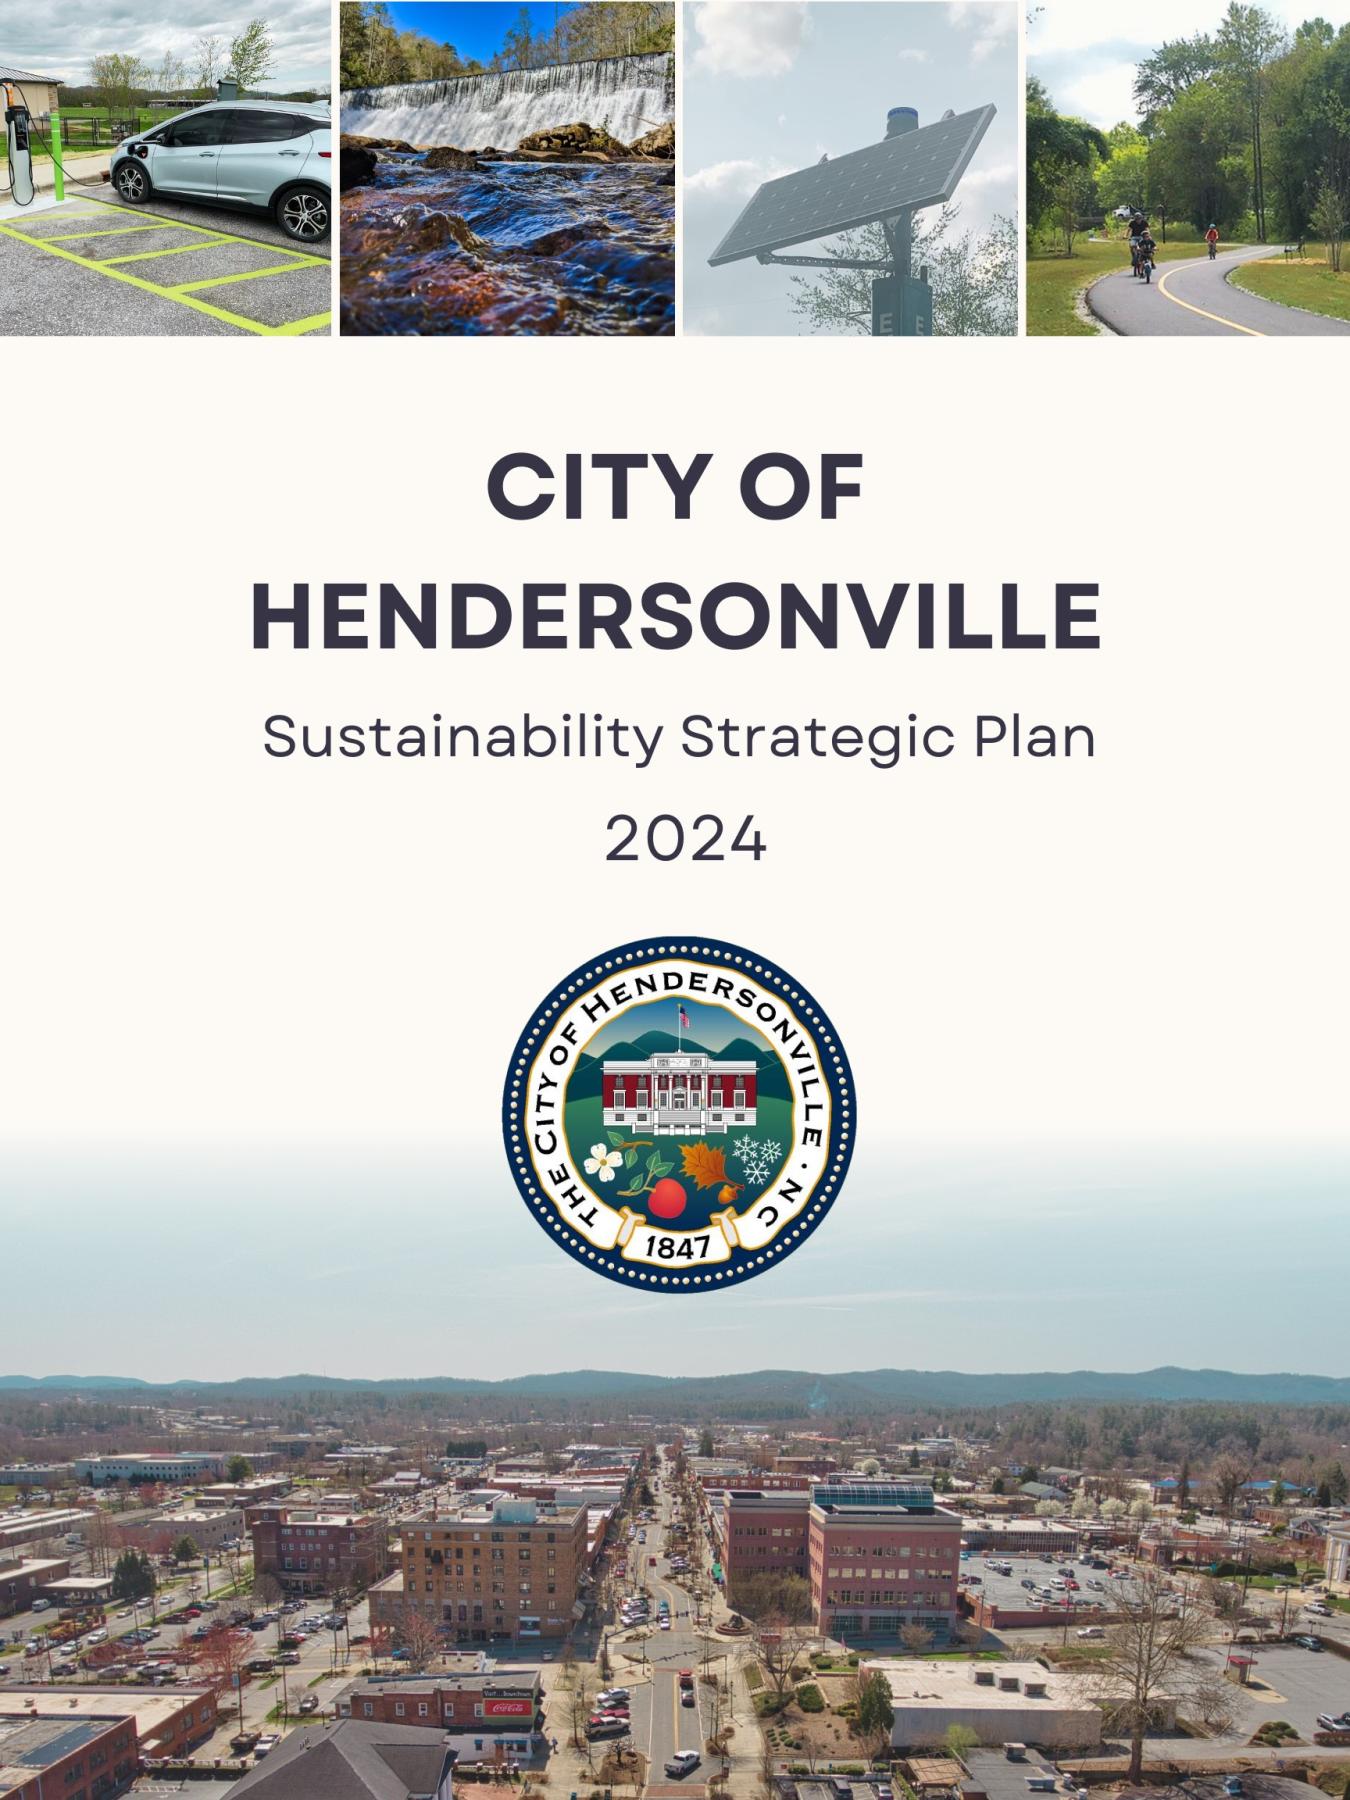 Drone photo of Hendersonville and ev charger, waterfall, solar panel and greenway